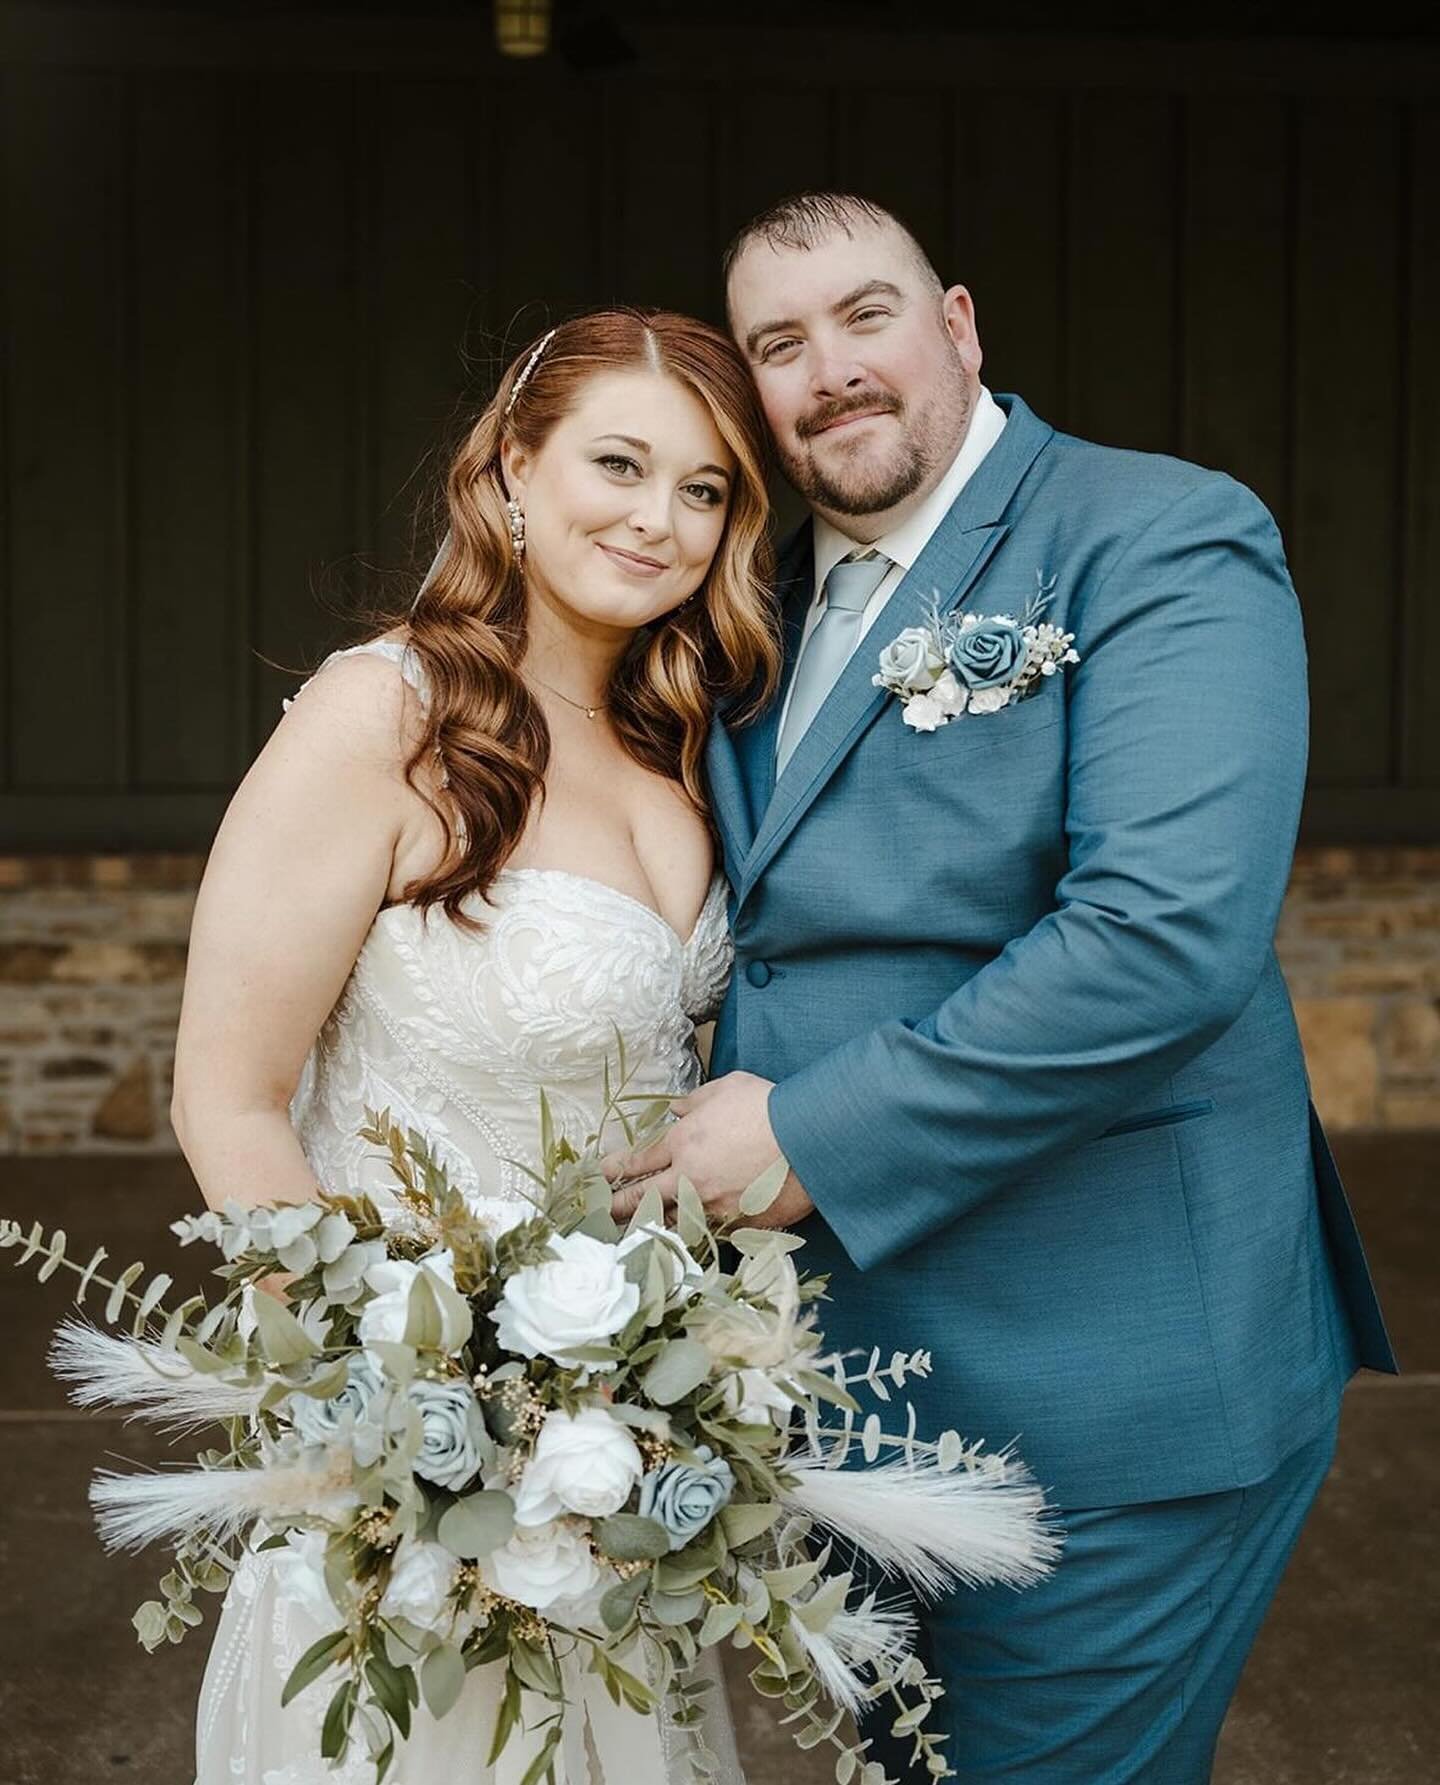 Obsessed with these photos of @weddinghairwithash by @curiouscourtneysphotography 🤍🤍🤍

I always love when I can do popular trends with a twist. Ashley wanted a slightly boho bouquet with a modern feel. We added light eucalyptus and some dusty blue